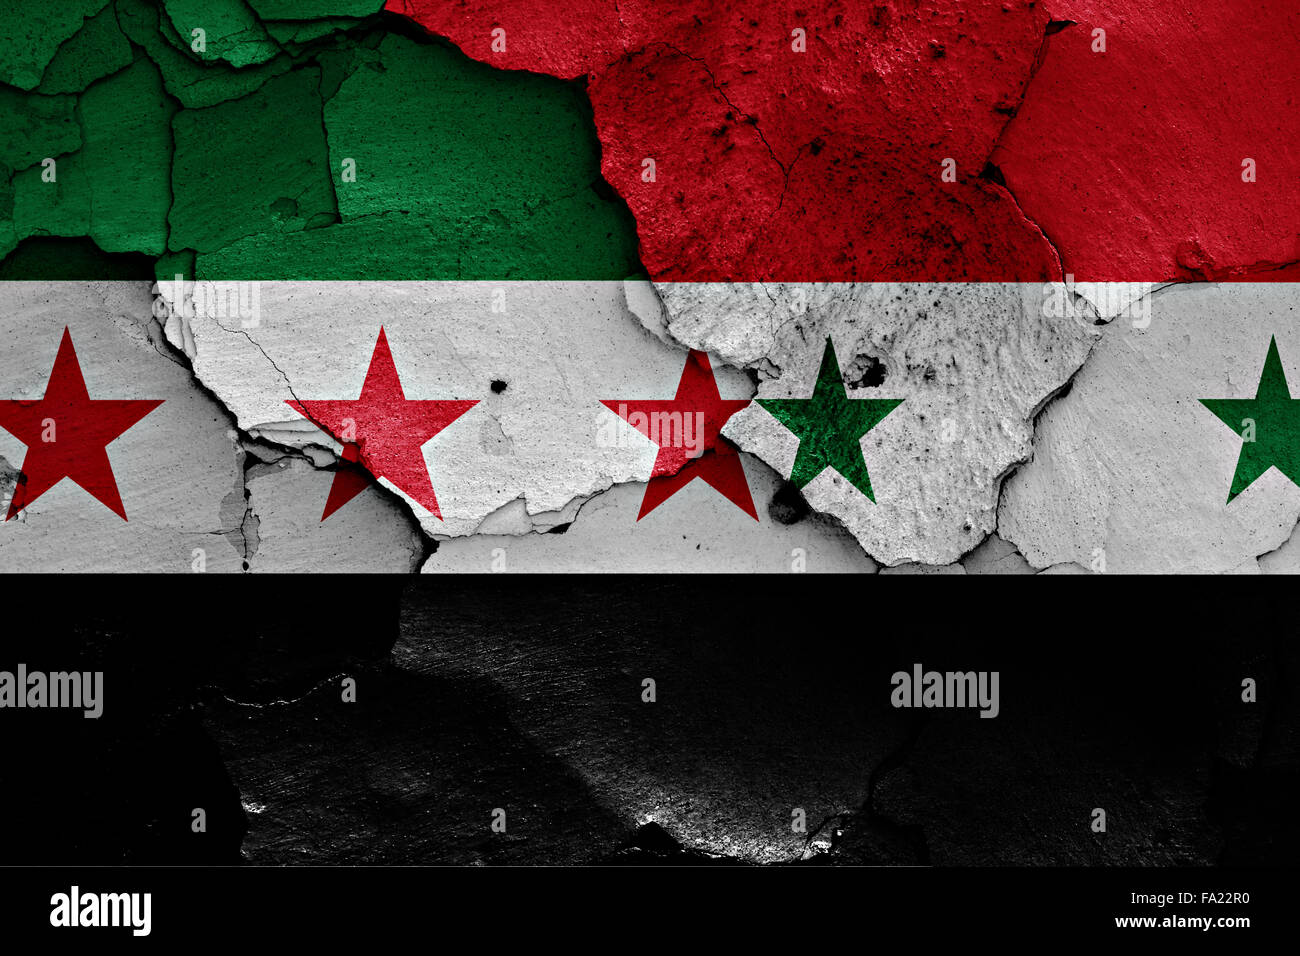 flags of Free Syrian Army and Syria painted on cracked wall Stock Photo